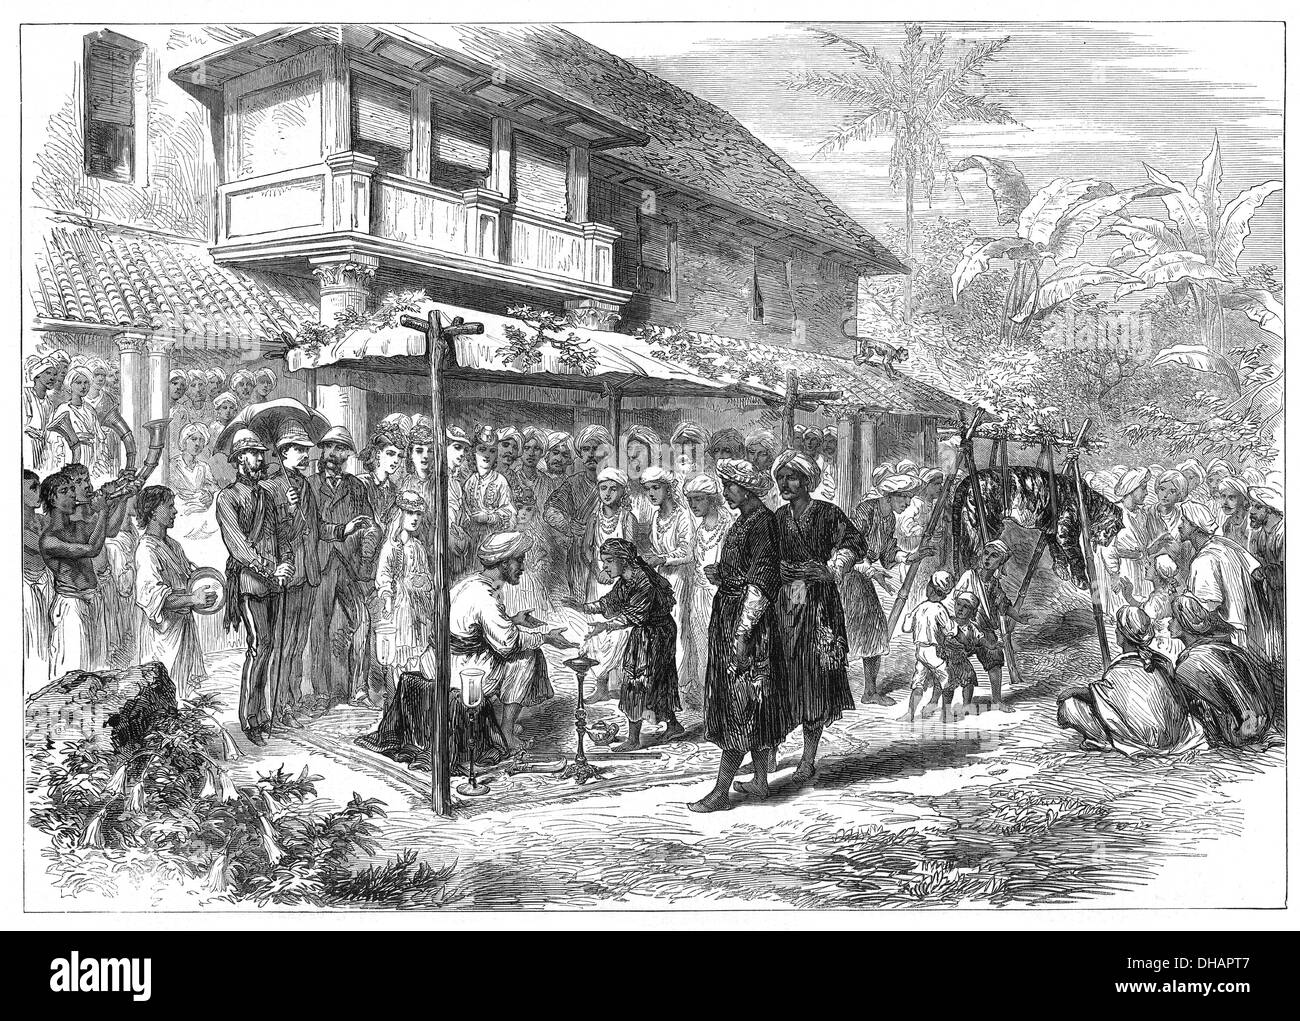 A tiger wedding in Coorg, Southern India. Illustration first published in The Illustrated London News on 6 December 1873. Stock Photo